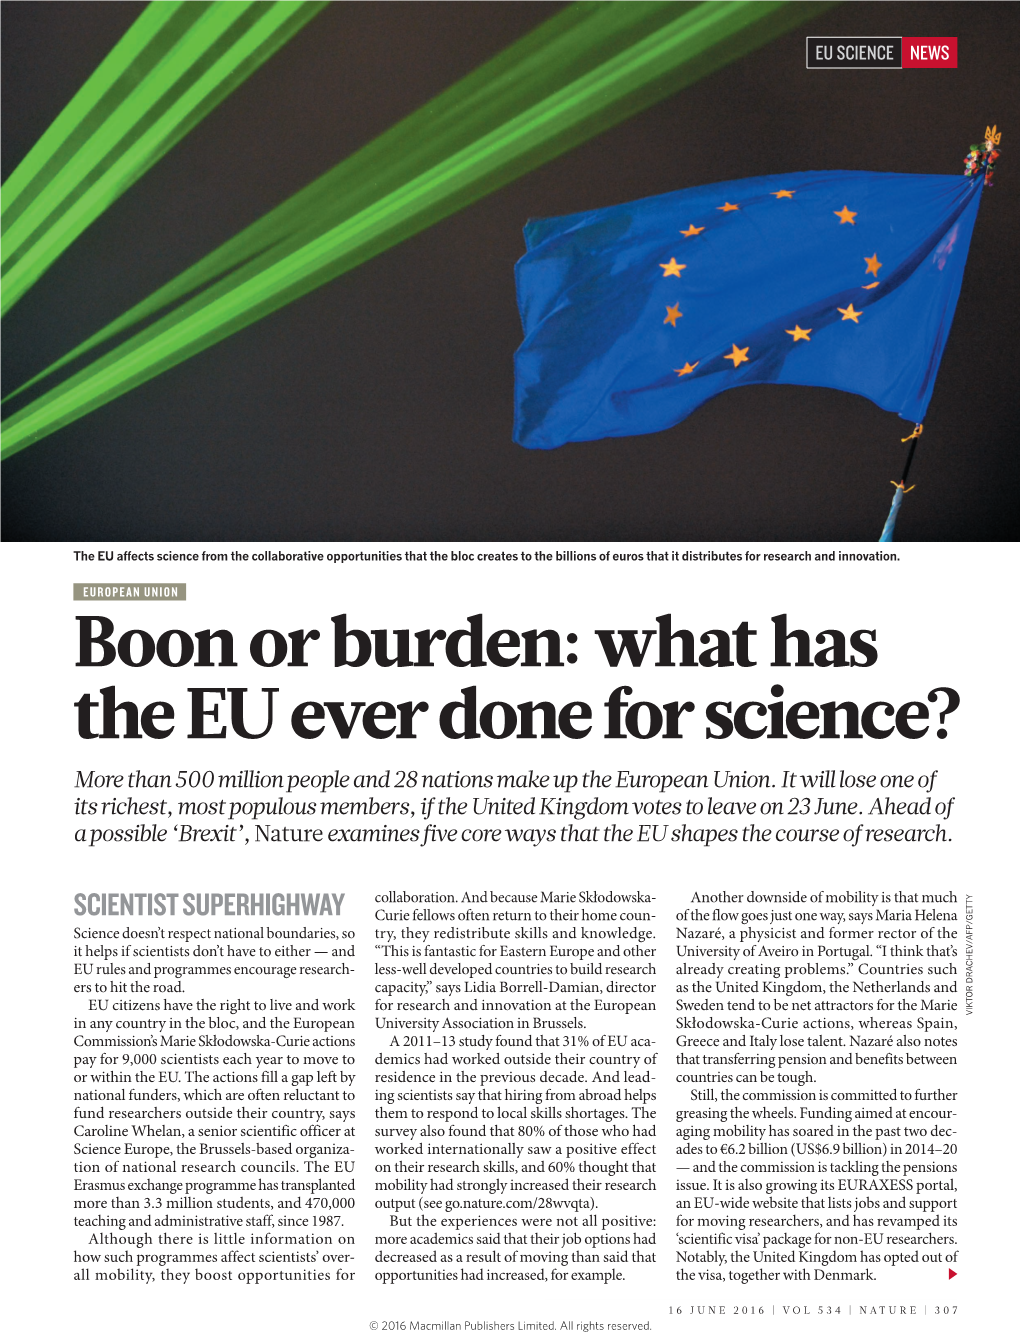 Boon Or Burden: What Has the EU Ever Done for Science? More Than 500 Million People and 28 Nations Make up the European Union